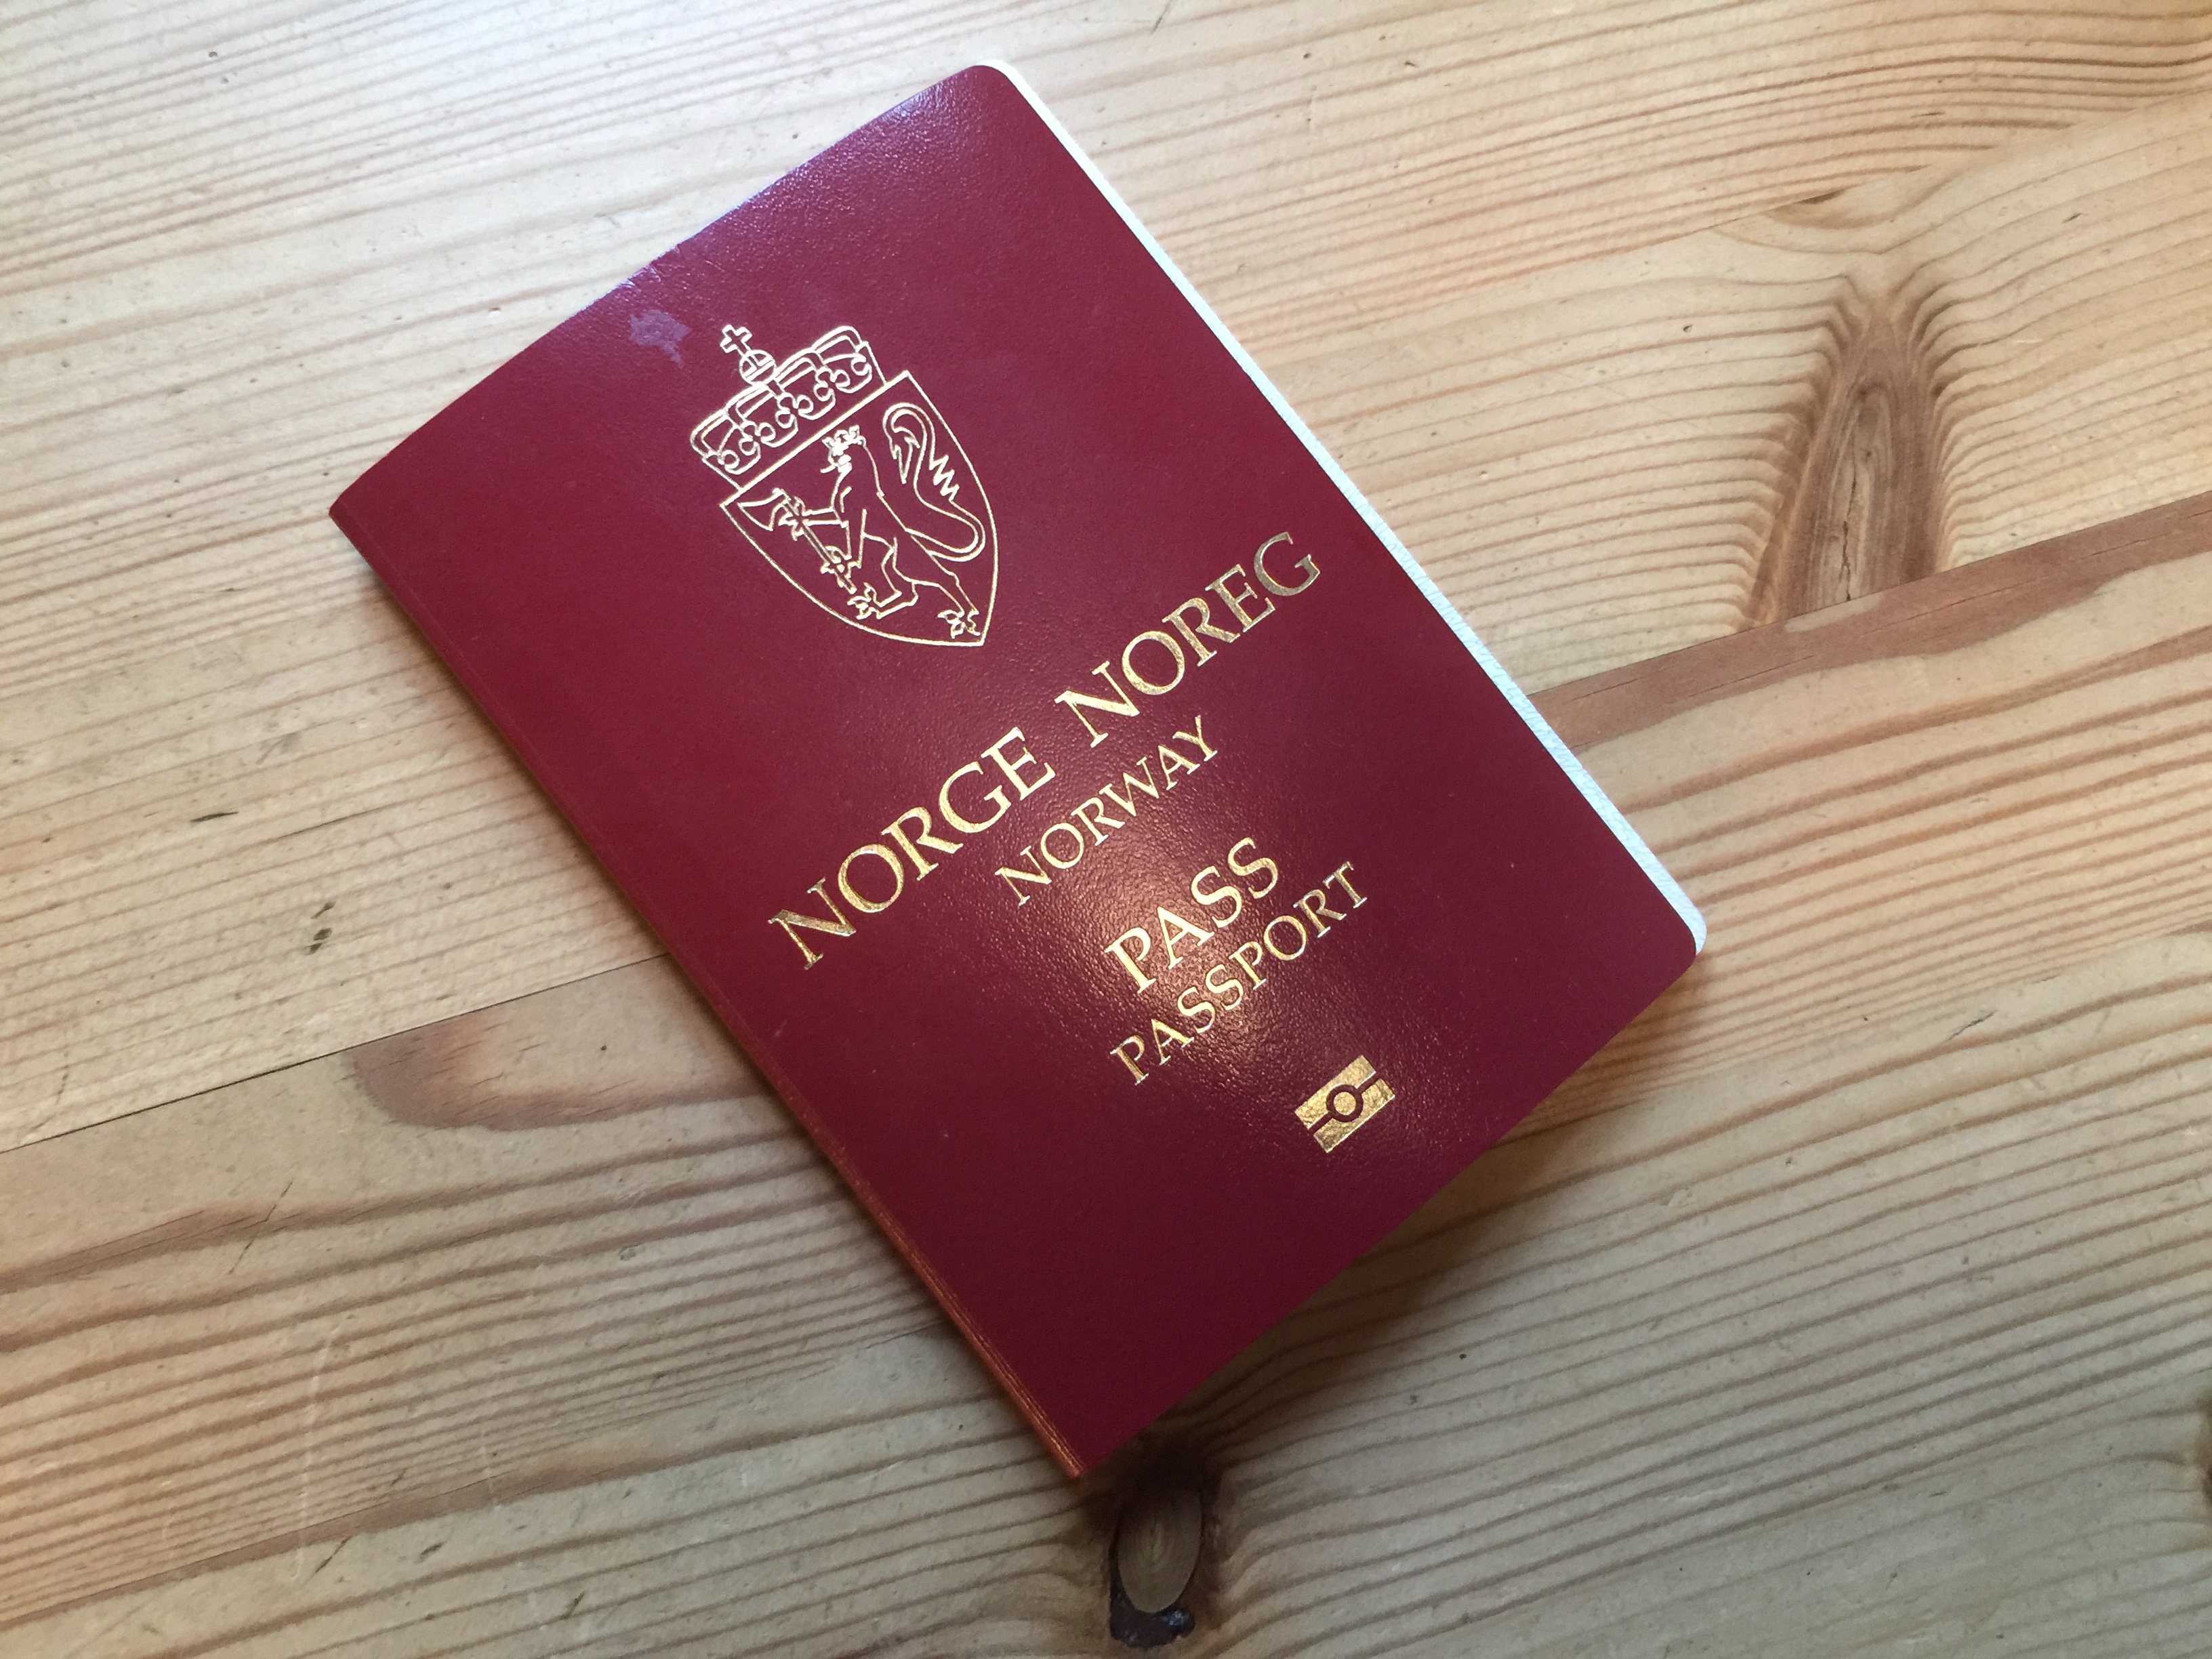 [Extending Vietnam Visa Exemption 2022] How Can Norway Passport Extend Duration of Stay After Entering Vietnam With 15 Days Free Visa?